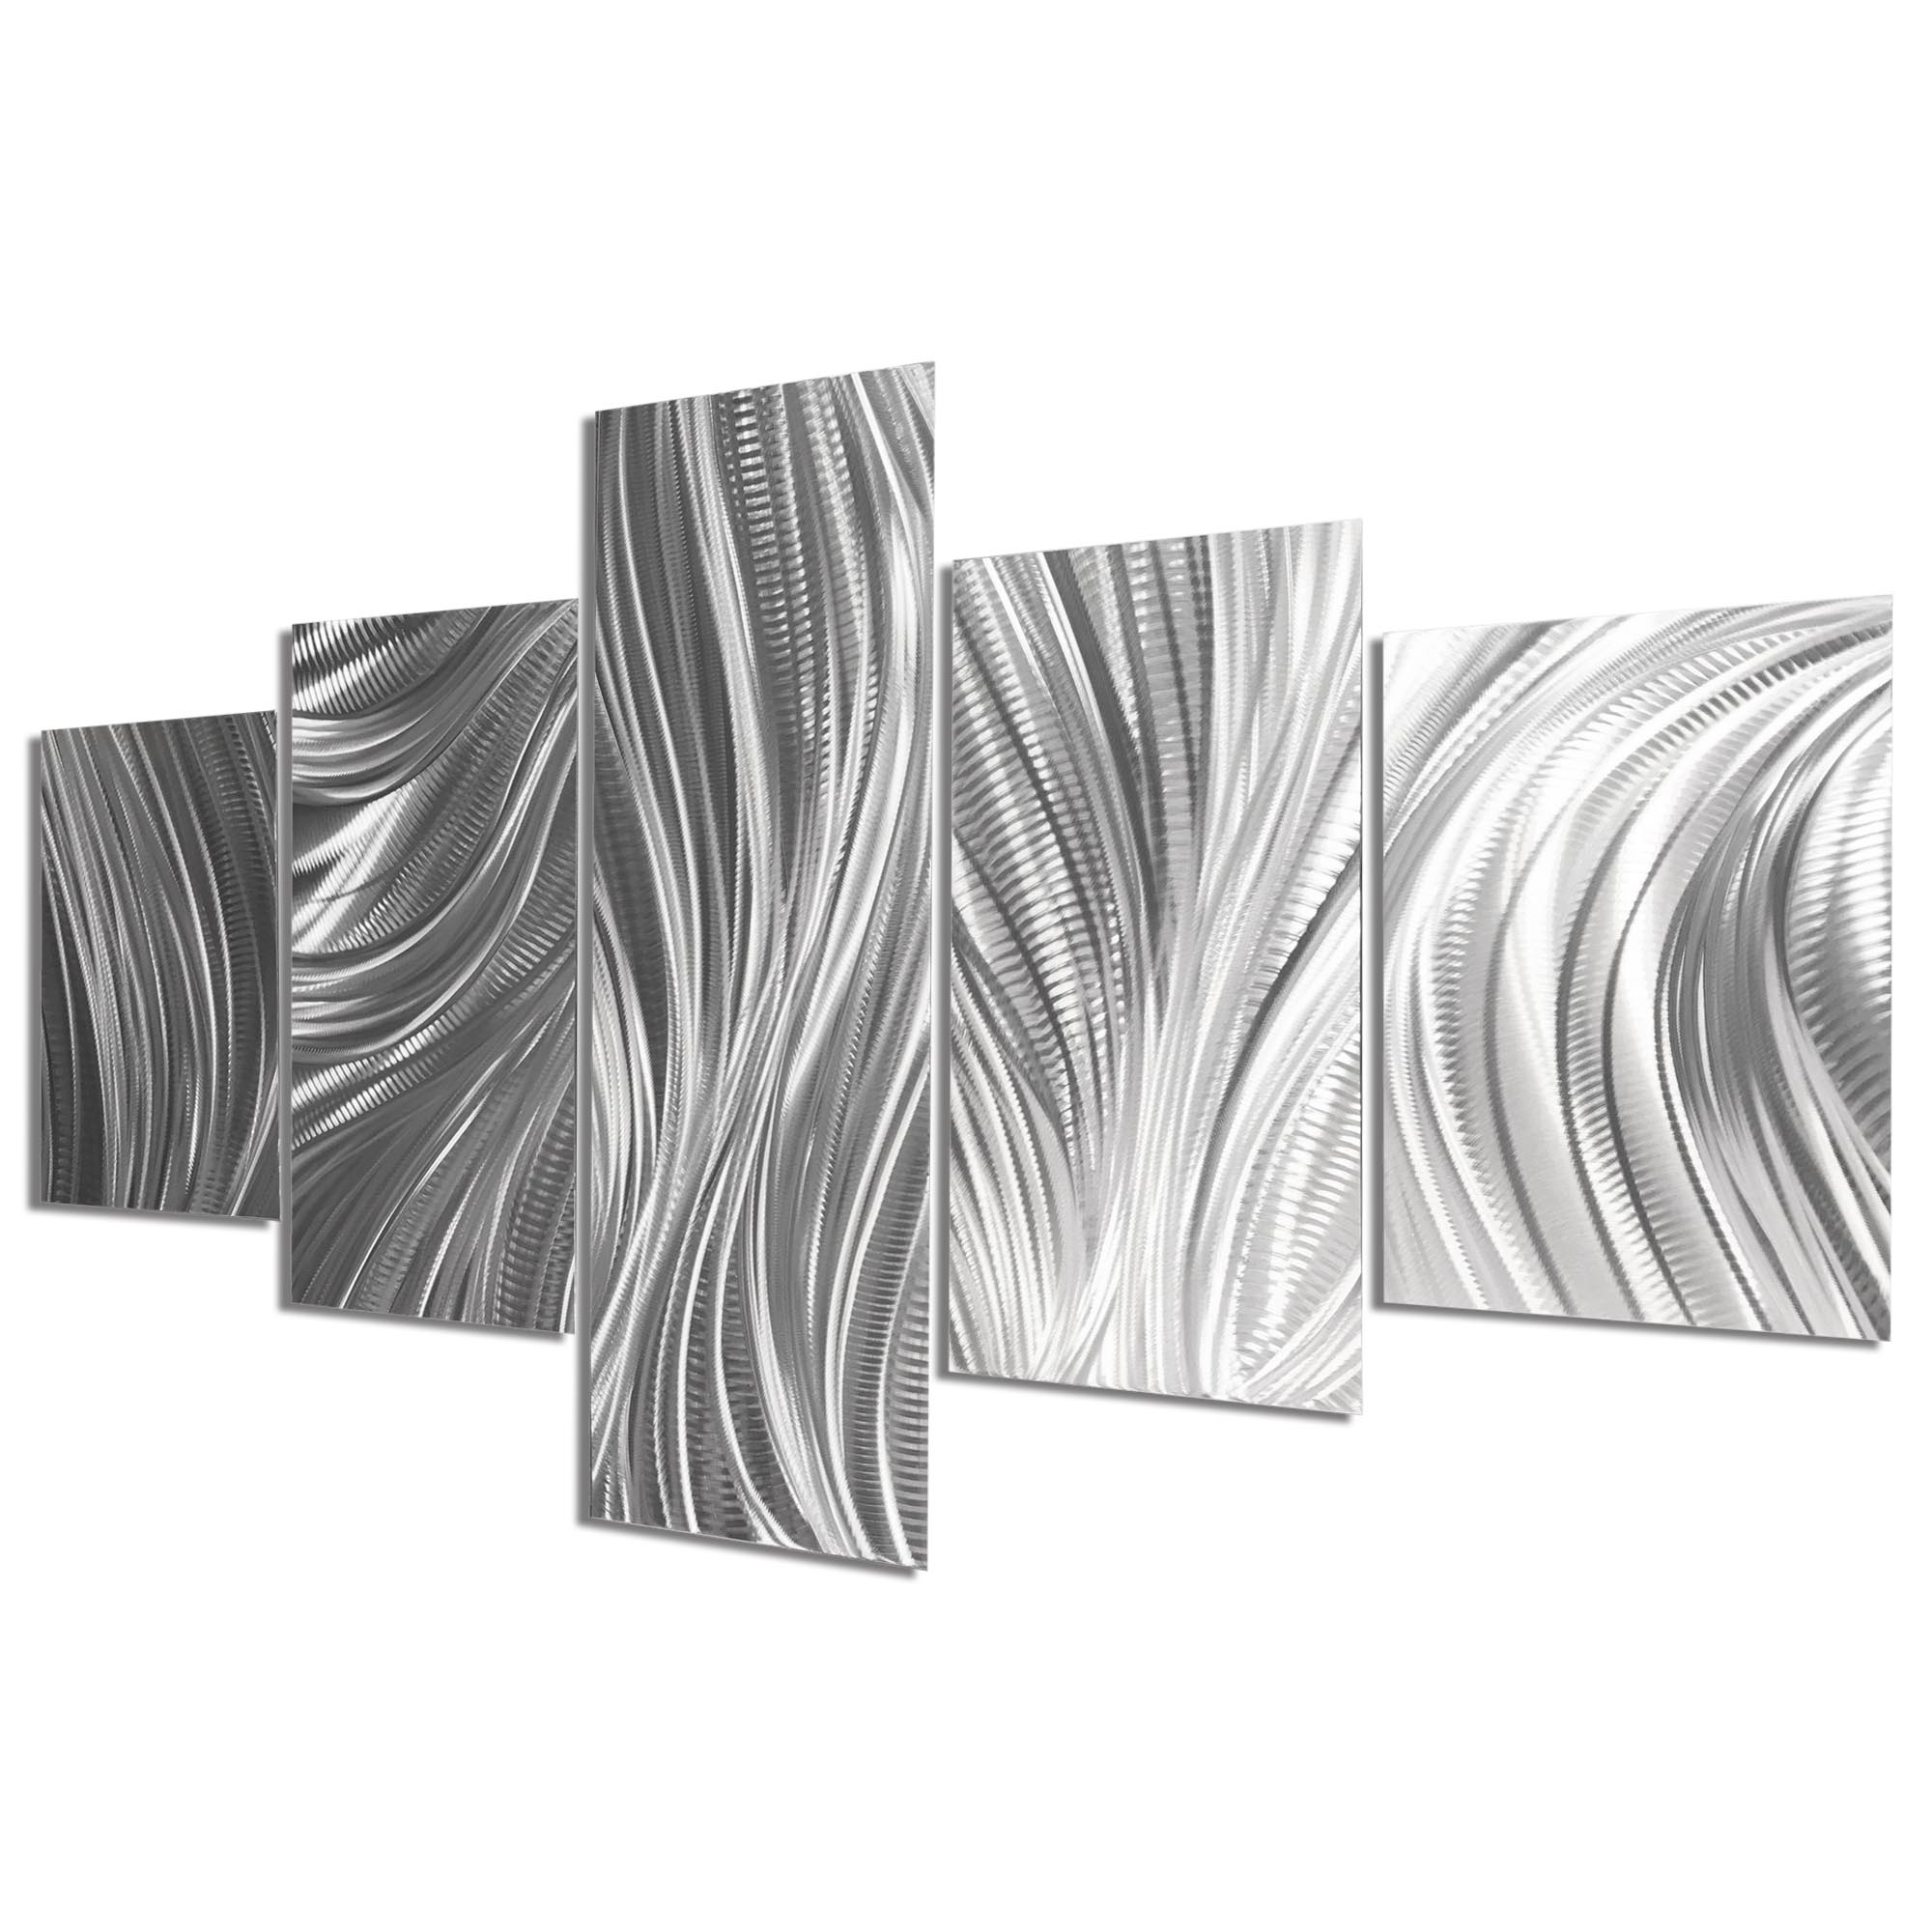 Columnar Plumage 64x36in. Natural Aluminum Abstract Decor - Image 2